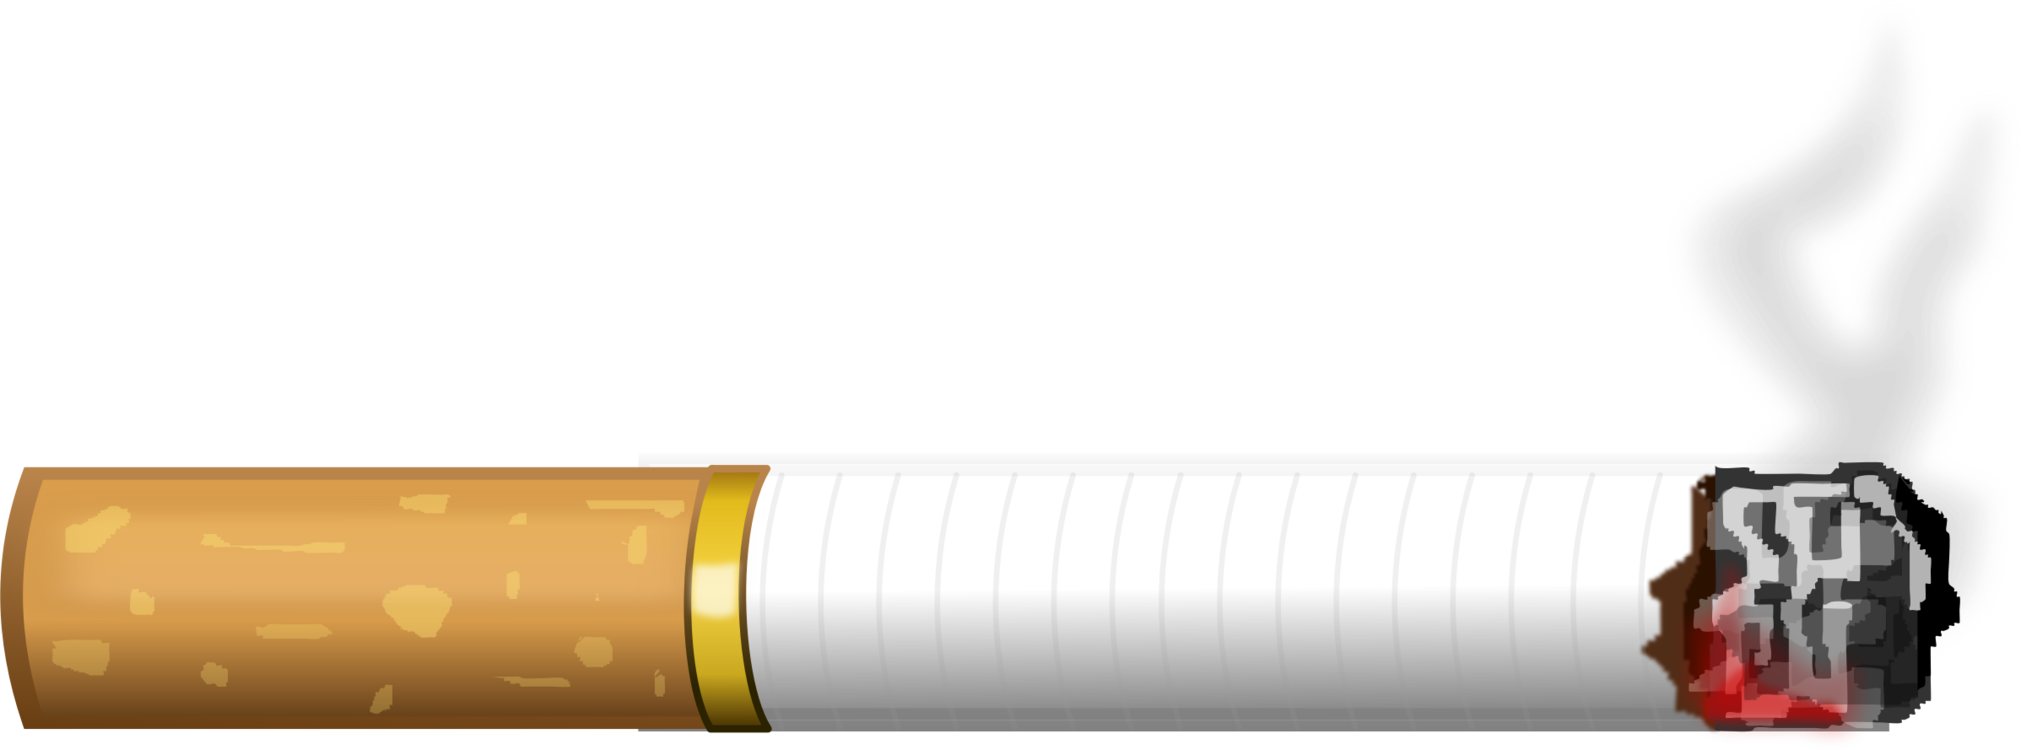 Cigarette,Tobacco Products,Cylinder